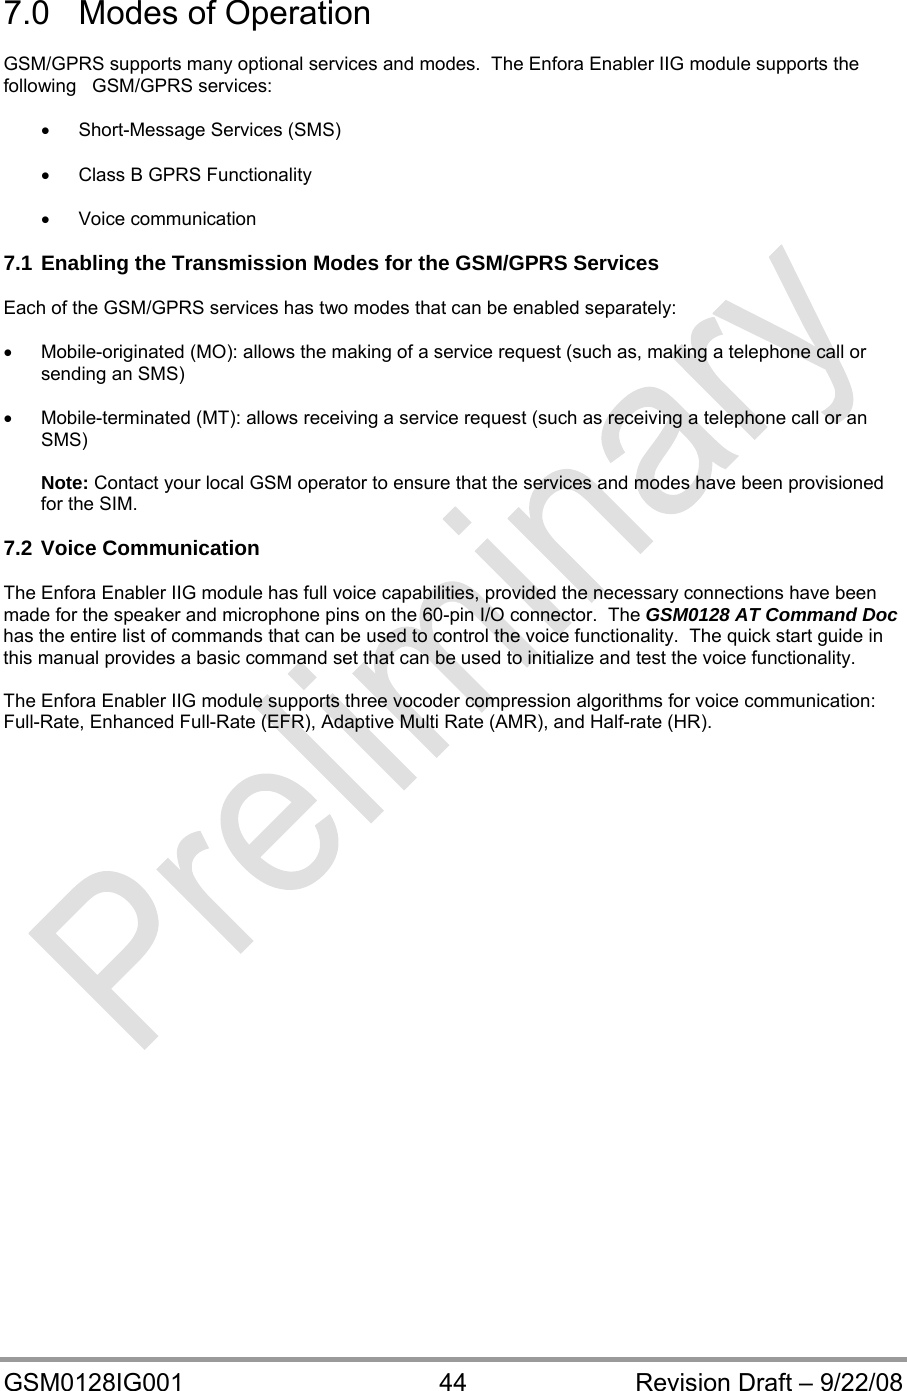  GSM0128IG001  44  Revision Draft – 9/22/08  7.0  Modes of Operation  GSM/GPRS supports many optional services and modes.  The Enfora Enabler IIG module supports the following   GSM/GPRS services:    Short-Message Services (SMS)    Class B GPRS Functionality   Voice communication  7.1 Enabling the Transmission Modes for the GSM/GPRS Services  Each of the GSM/GPRS services has two modes that can be enabled separately:    Mobile-originated (MO): allows the making of a service request (such as, making a telephone call or sending an SMS)    Mobile-terminated (MT): allows receiving a service request (such as receiving a telephone call or an SMS)  Note: Contact your local GSM operator to ensure that the services and modes have been provisioned for the SIM.  7.2 Voice Communication  The Enfora Enabler IIG module has full voice capabilities, provided the necessary connections have been      made for the speaker and microphone pins on the 60-pin I/O connector.  The GSM0128 AT Command Doc has the entire list of commands that can be used to control the voice functionality.  The quick start guide in this manual provides a basic command set that can be used to initialize and test the voice functionality.  The Enfora Enabler IIG module supports three vocoder compression algorithms for voice communication: Full-Rate, Enhanced Full-Rate (EFR), Adaptive Multi Rate (AMR), and Half-rate (HR).   